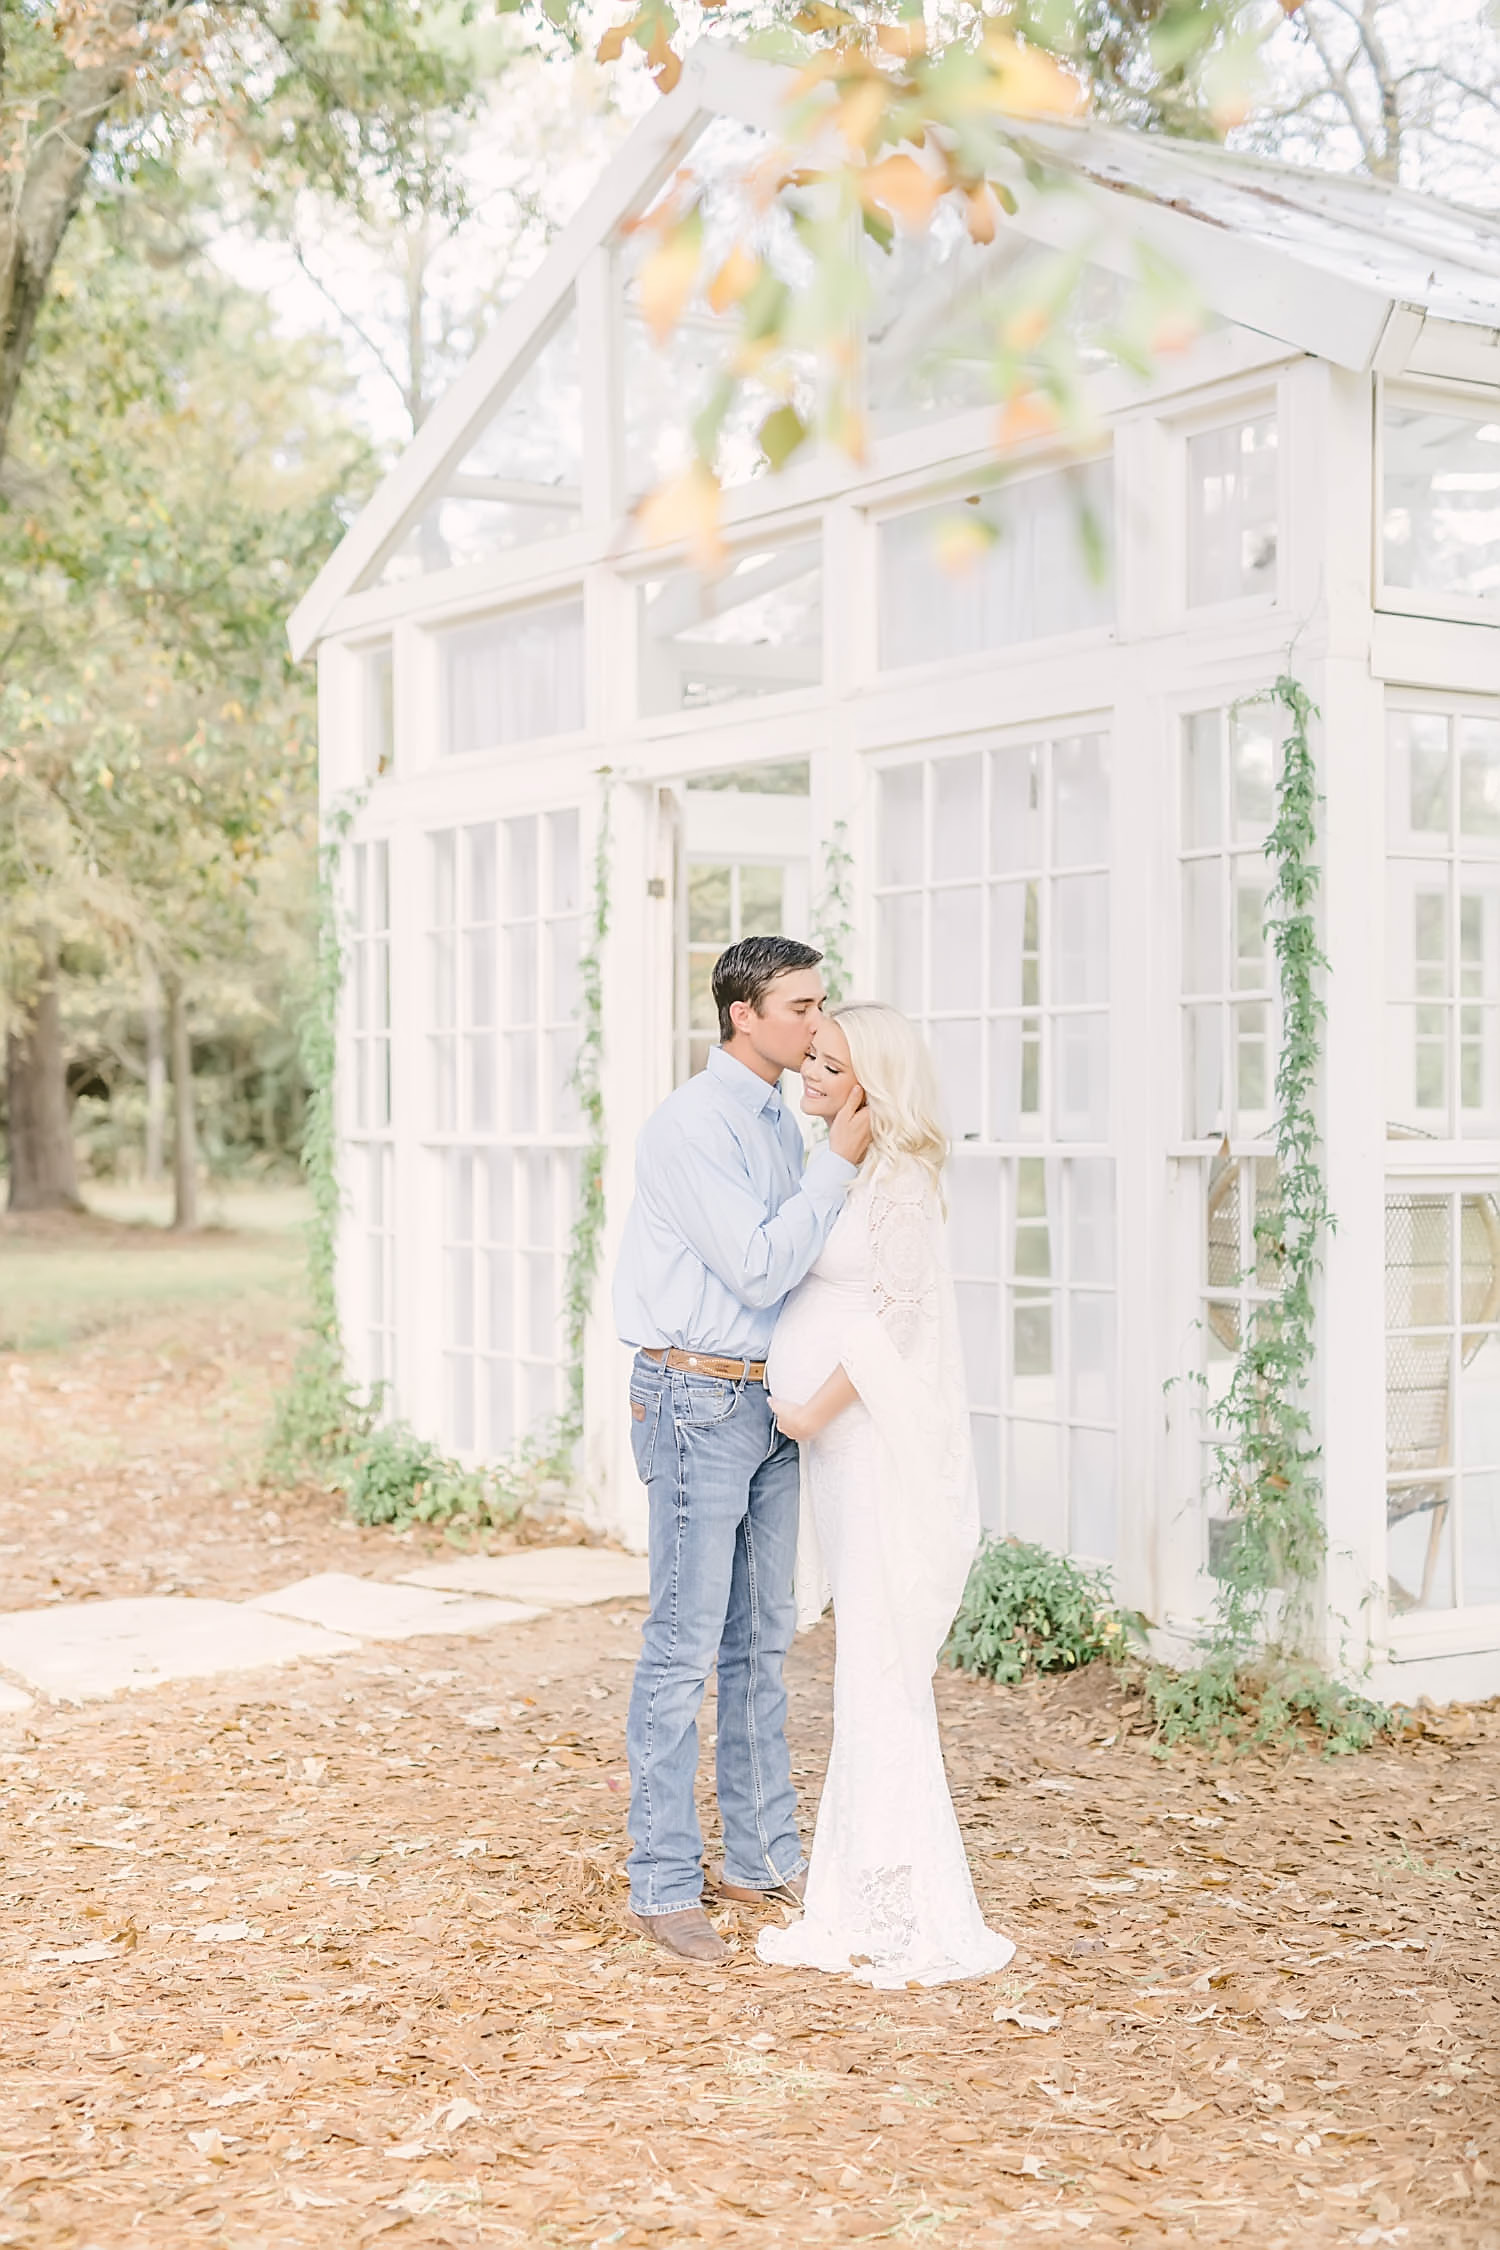 Husband kisses pregnant wife on forehead during maternity portrait session at the Oak Atelier by Chrisitna Elliott Photography in Conroe. White boho crochet floor length maternity dress fall maternity #christinaelliottphotography #christinaelliotmaternitysession #babybump #houstonmaternityphotographer #houstonmaternity #pregnancypic #houstonphotographylocations #materntiyoutfit #soontobeparents #babyontheway #houstonphotos #houstontexasmaternityphotographer #oakatelierphotos #conroetexas